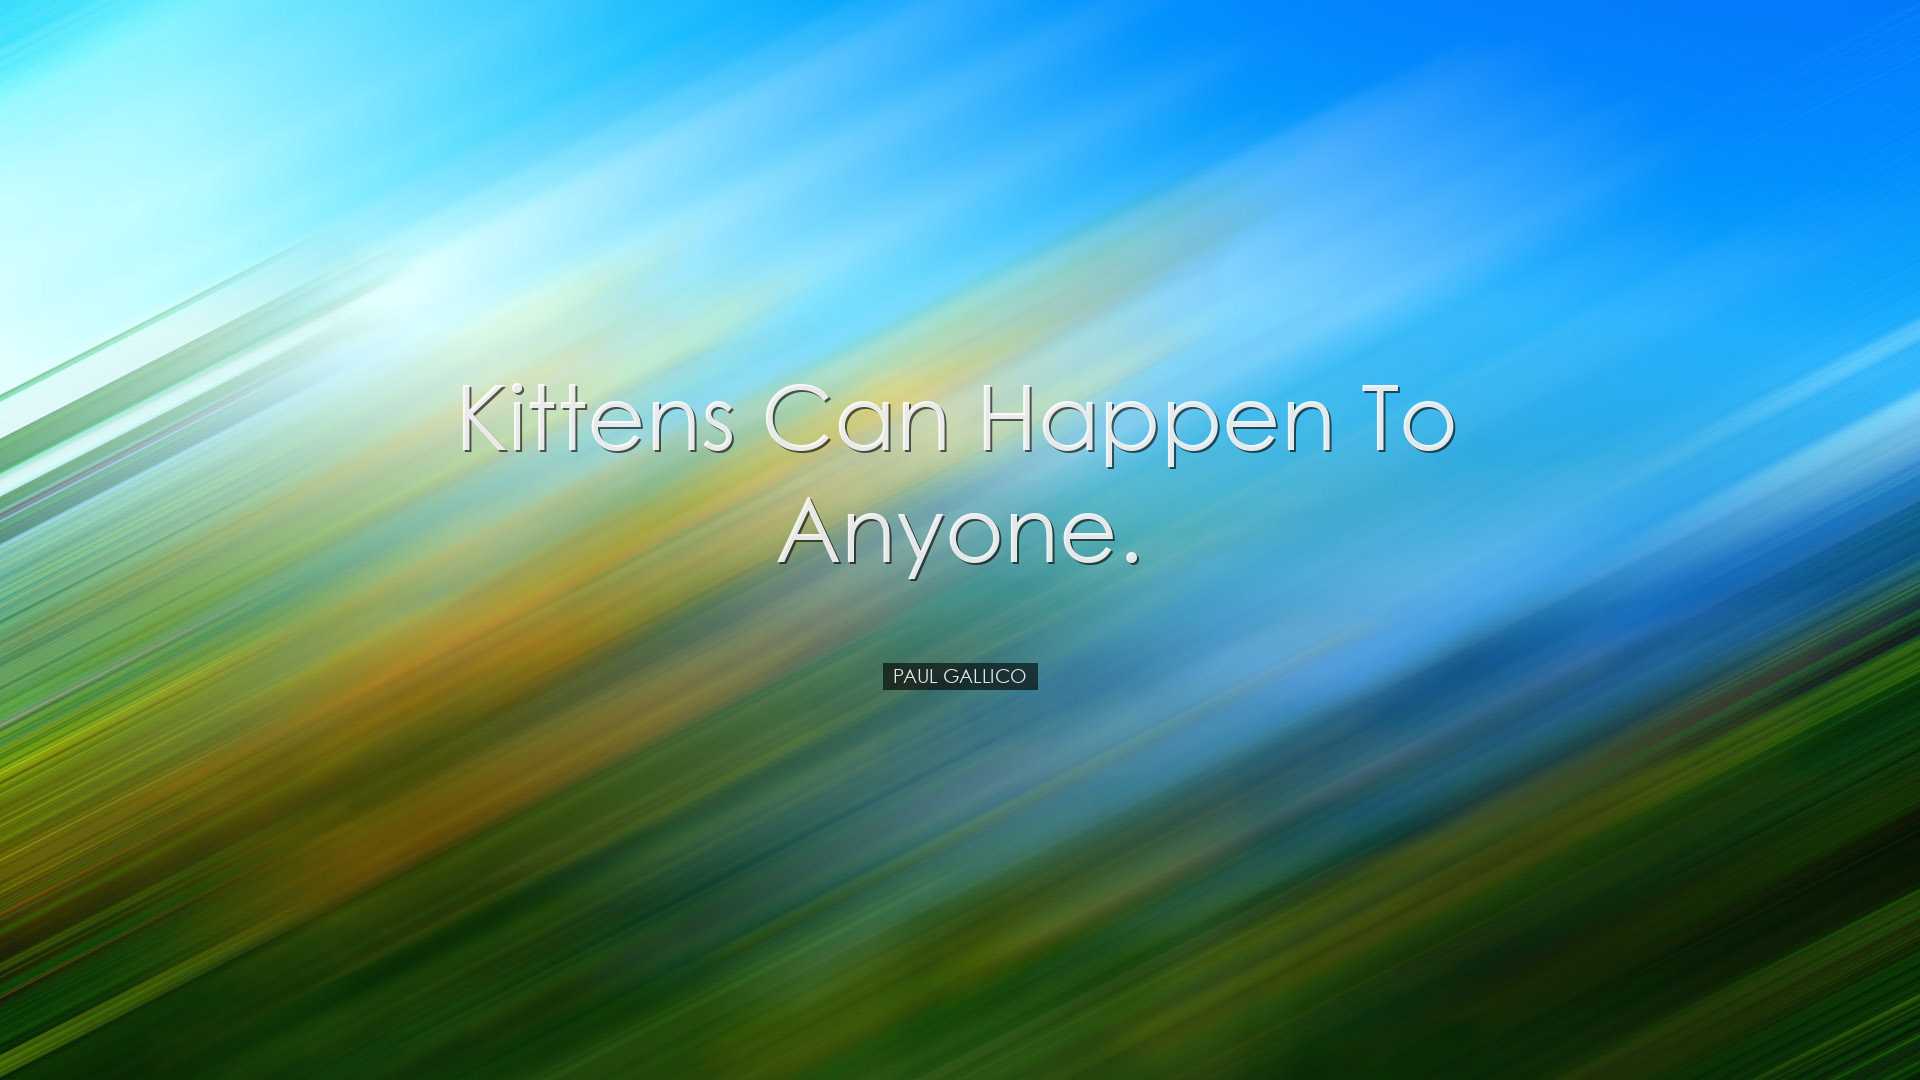 Kittens can happen to anyone. - Paul Gallico